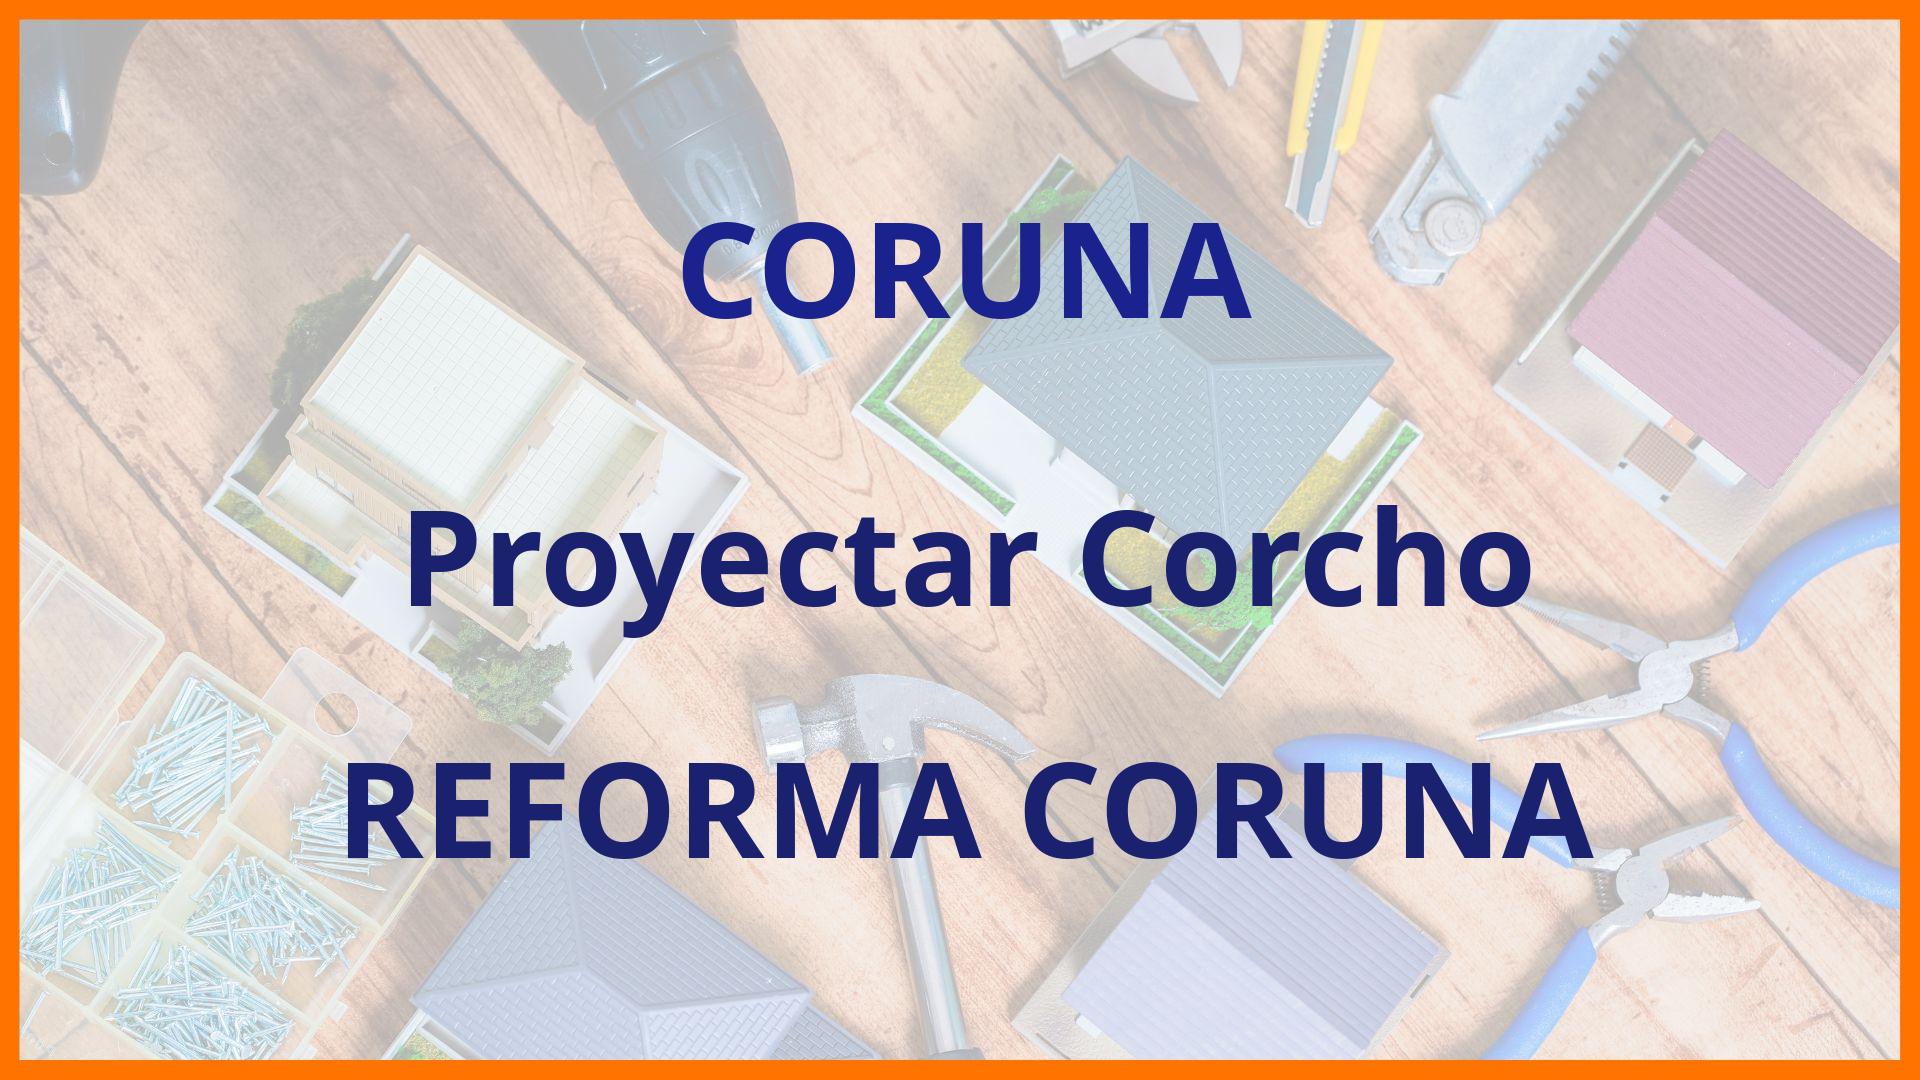 Proyectar Corcho